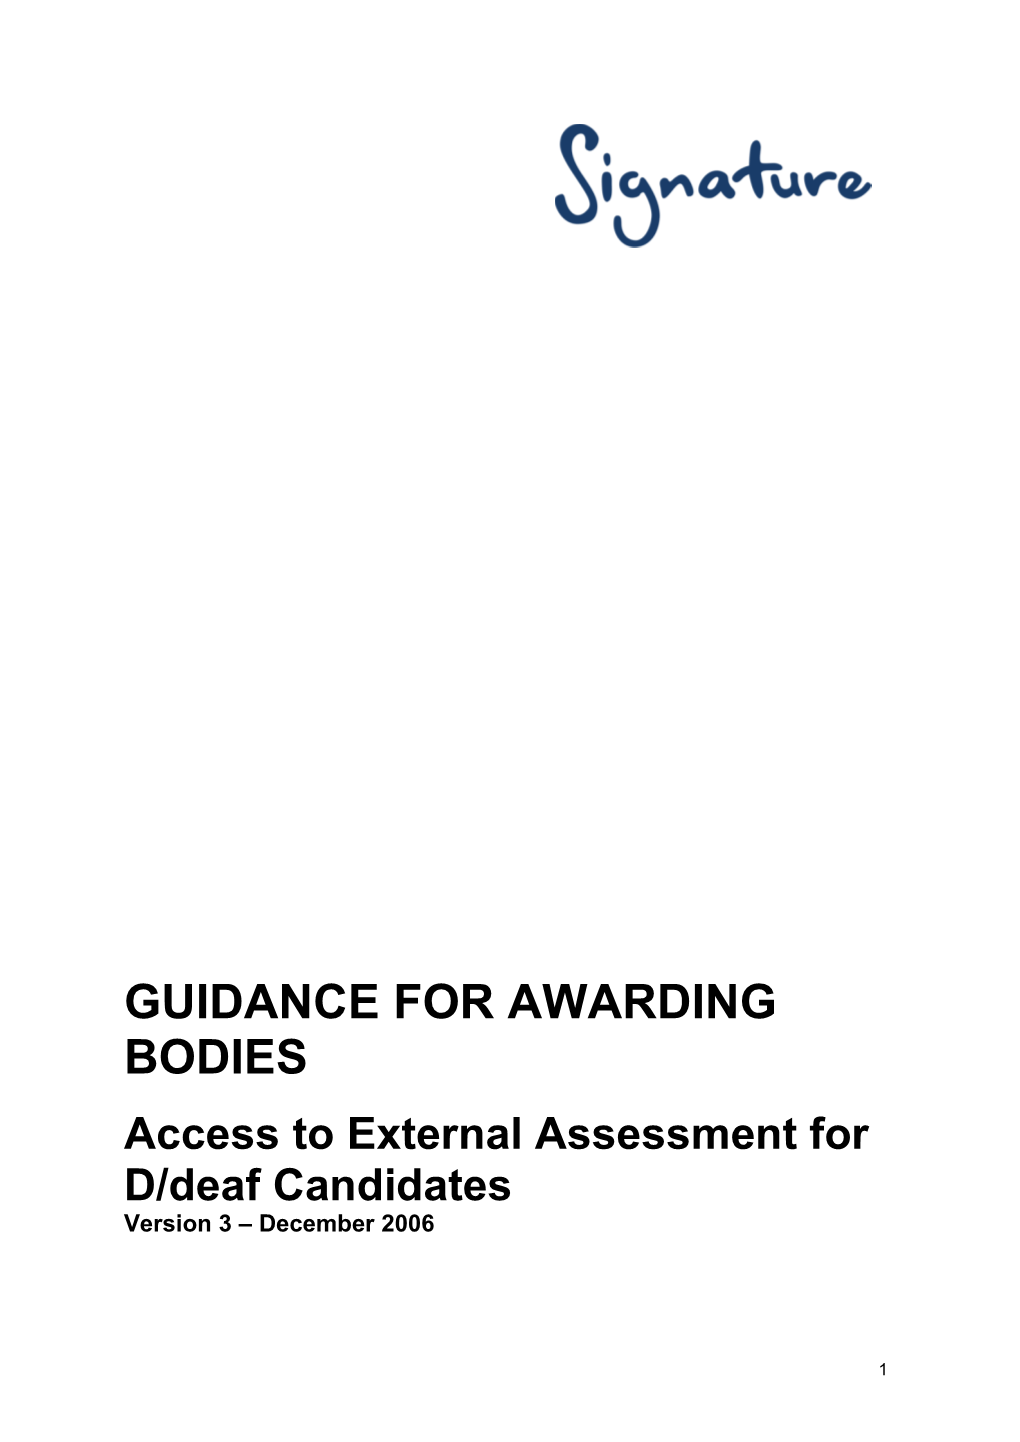 Access to Assessments